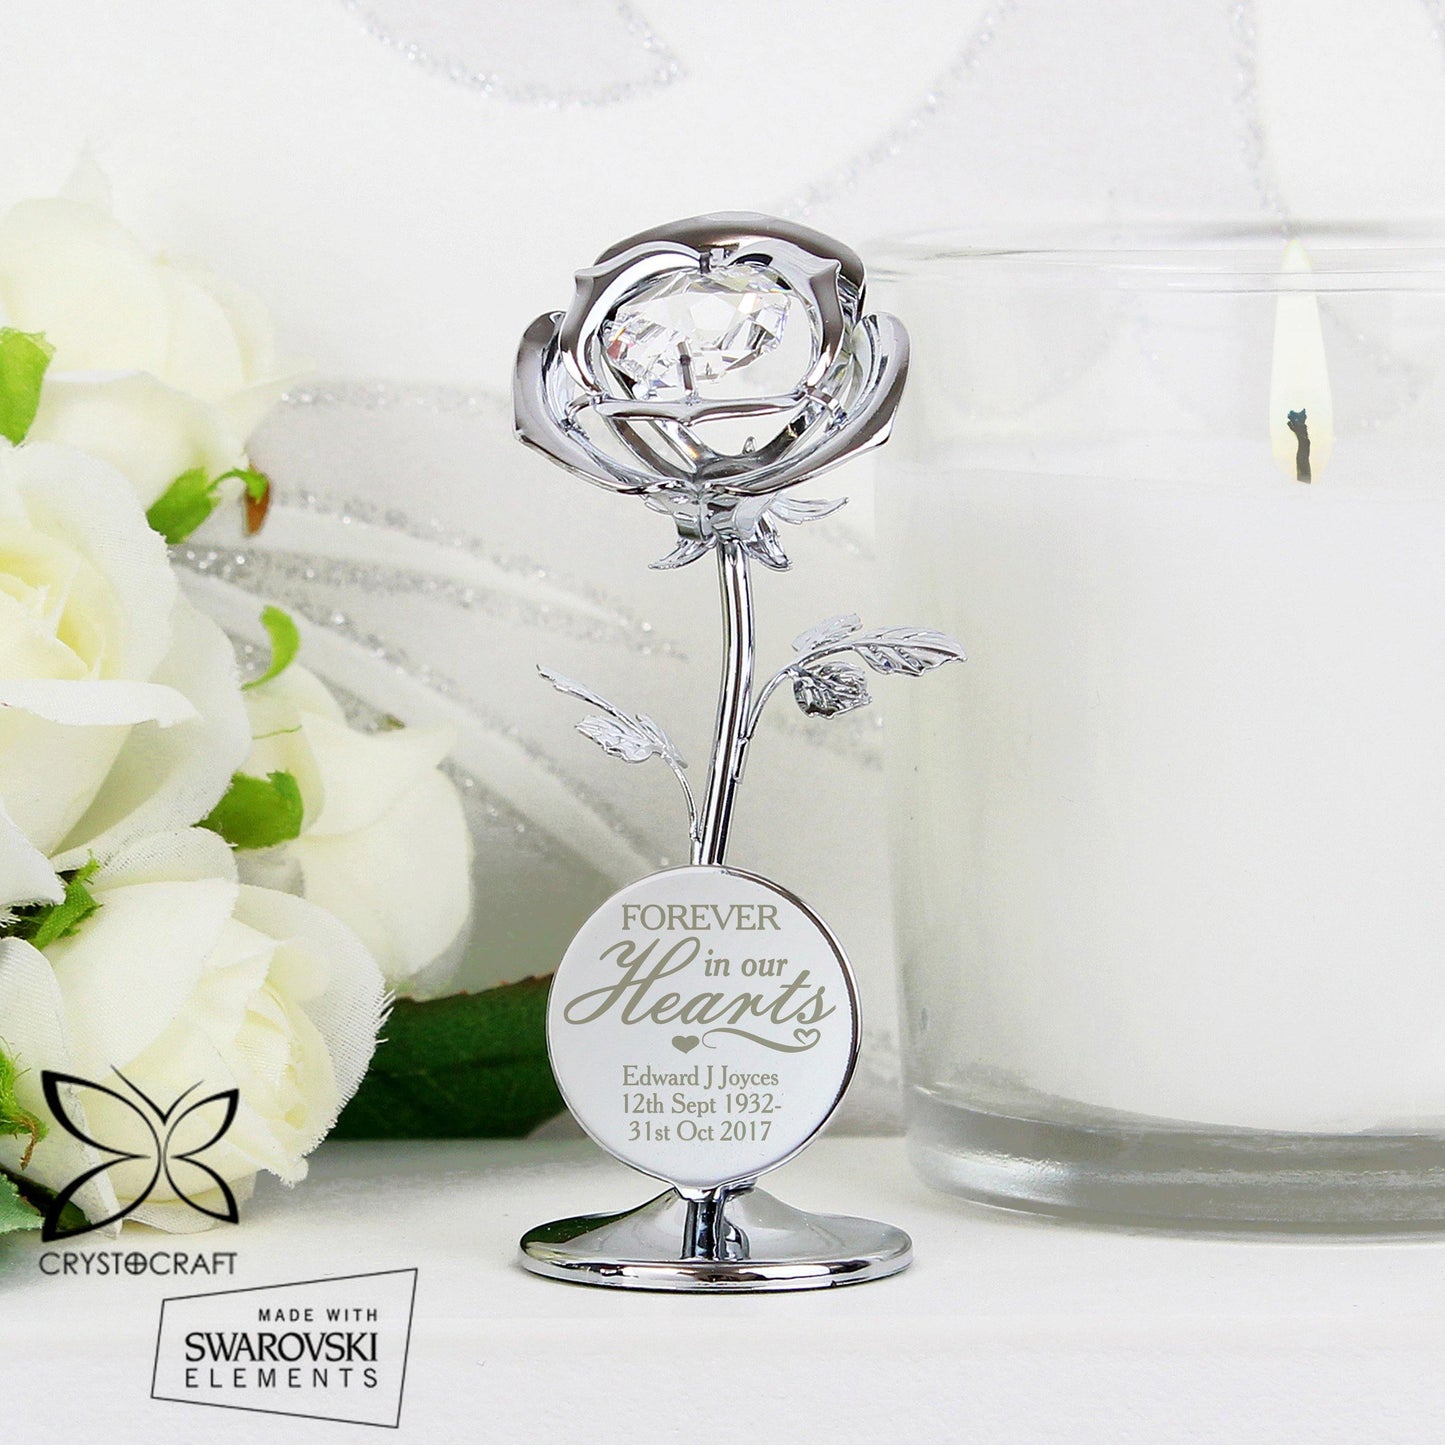 Personalised Silver Forever in Our Hearts Crystocraft Rose Ornament - Kporium Home & Garden